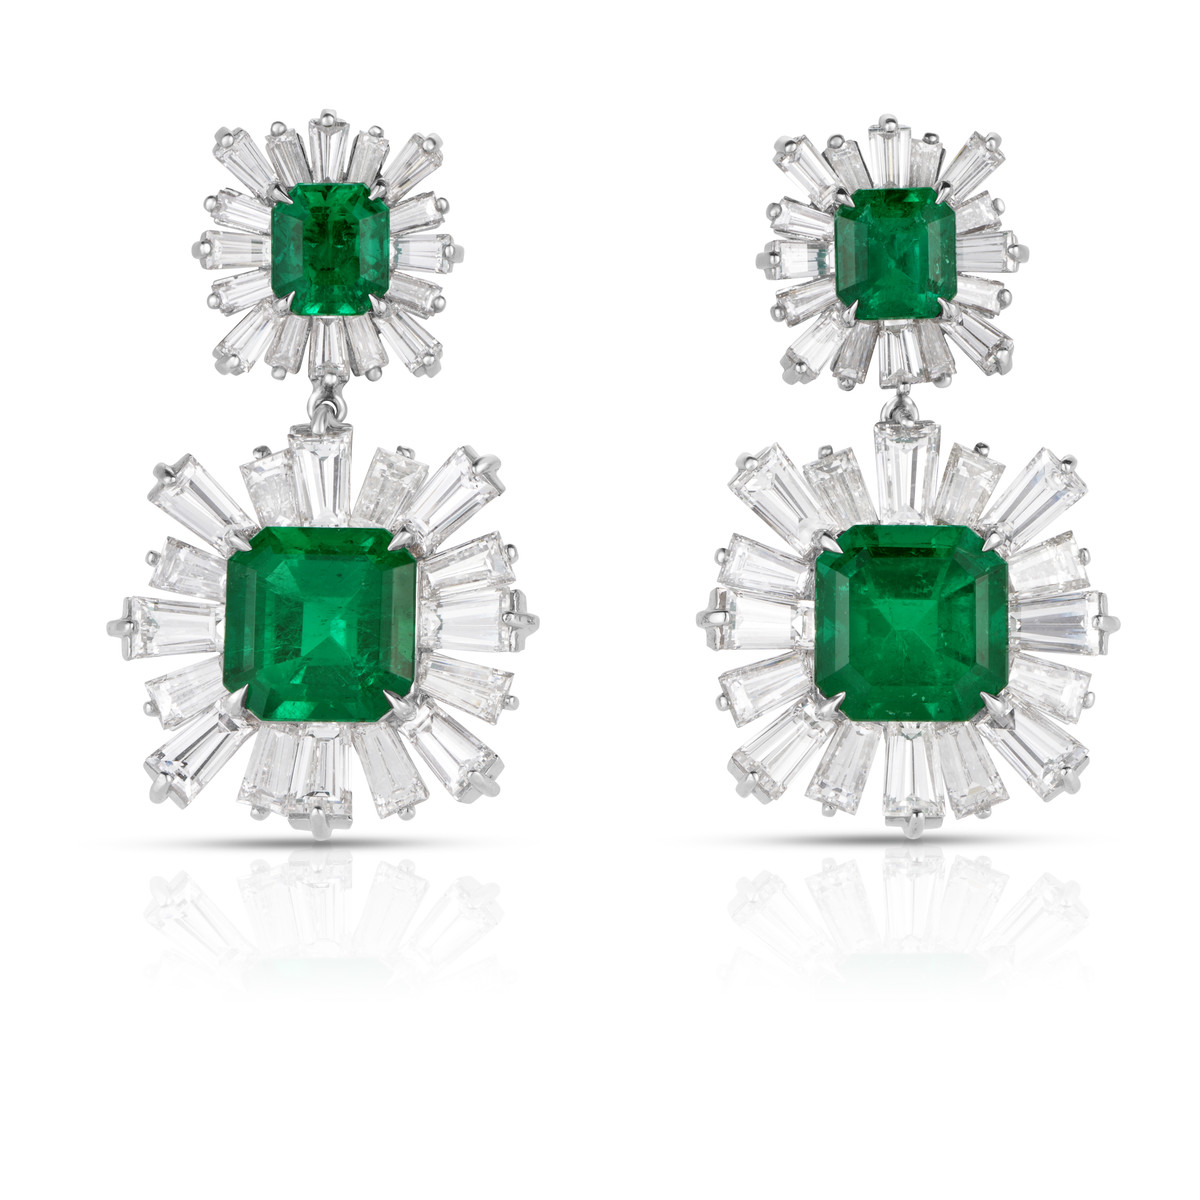 Hyde Park Collection Platinum Emerald & Diamond Earrings-54466 Product Image